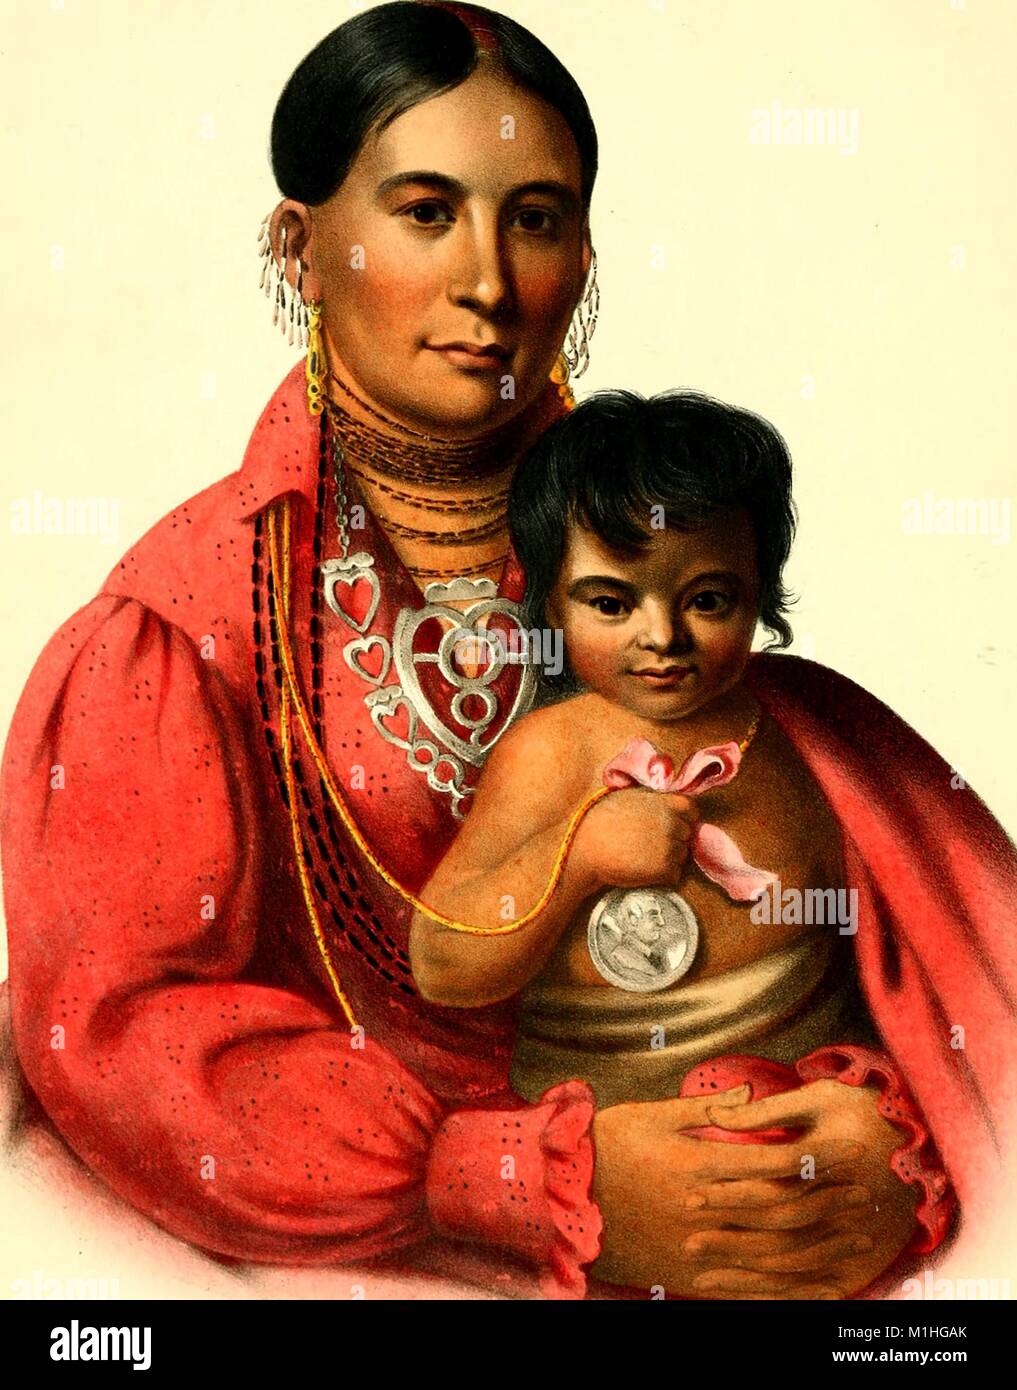 Waist-up, color illustration of an Osage Nation woman named Mohongo, wearing a red dress, earrings, several necklaces and holding a small child who clasps her silver medal in its hand, from the book 'Indian Biography' authored by Thatcher BB (Benjamin Bussy), 1825. Courtesy Internet Archive. () Stock Photo